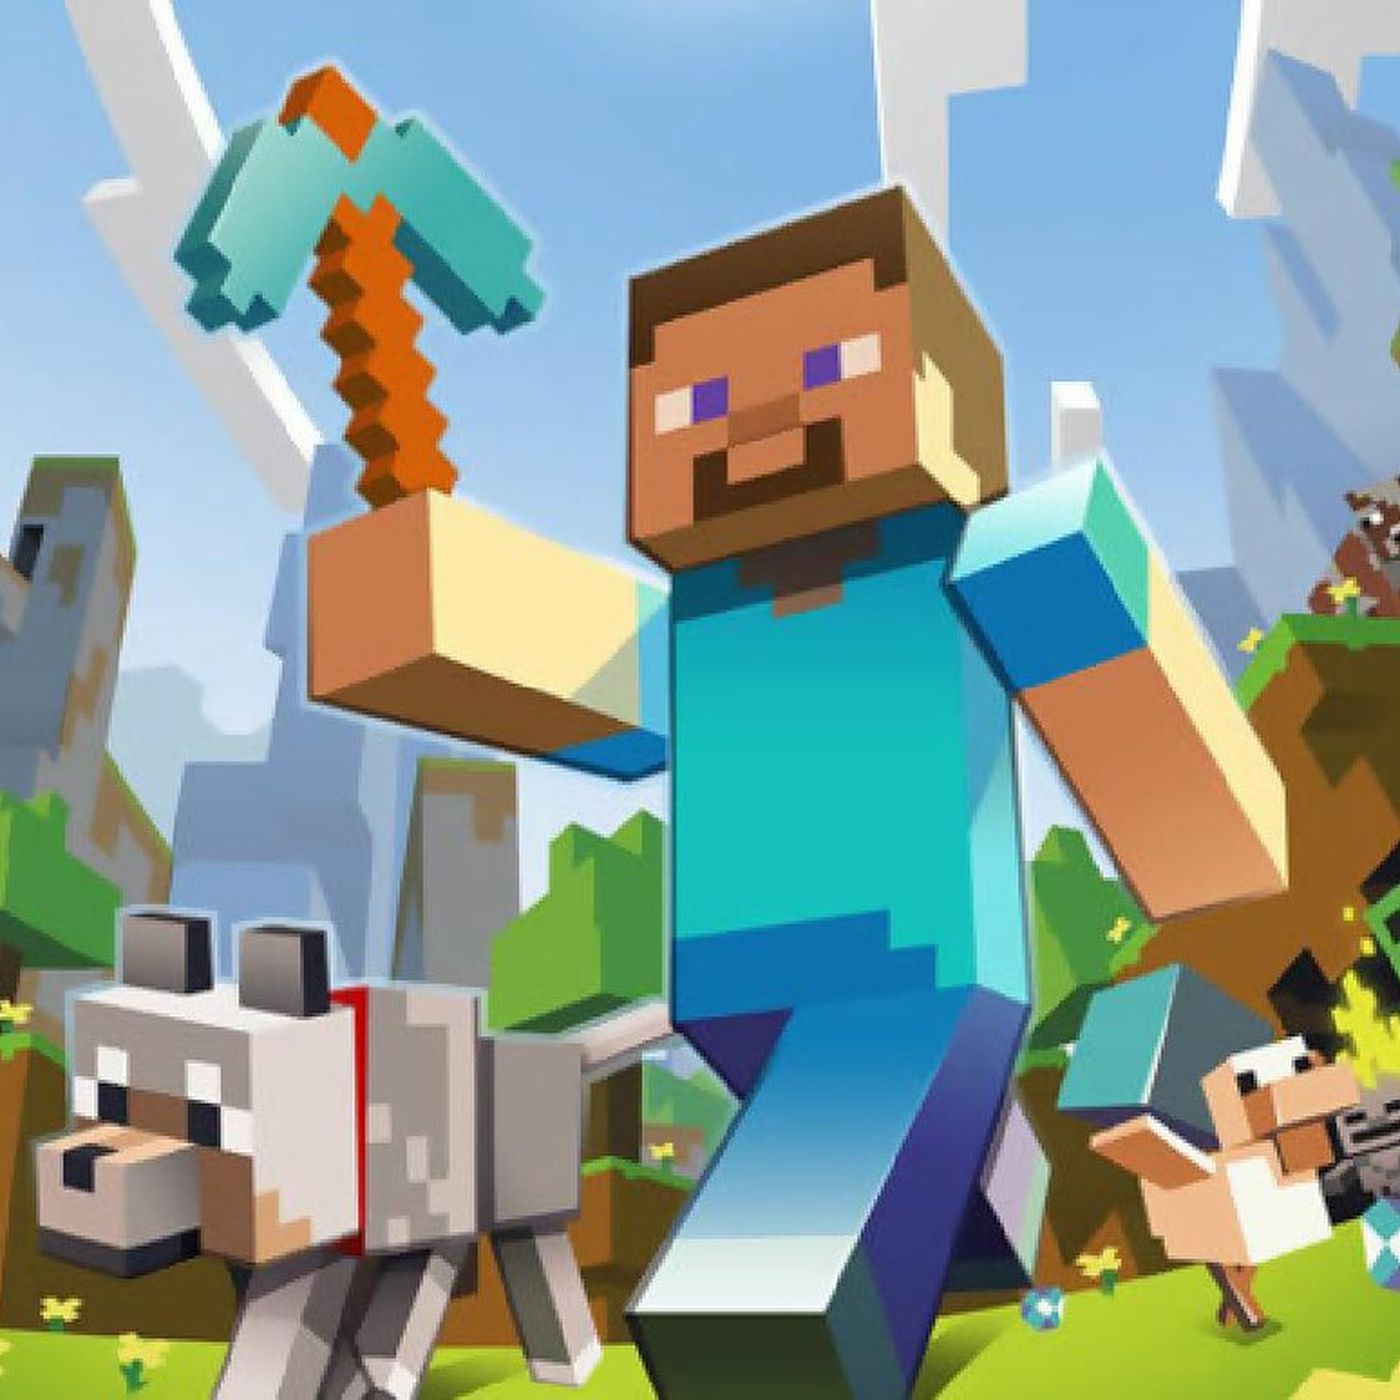 Minecraft is still the biggest game on YouTube by tens of billions